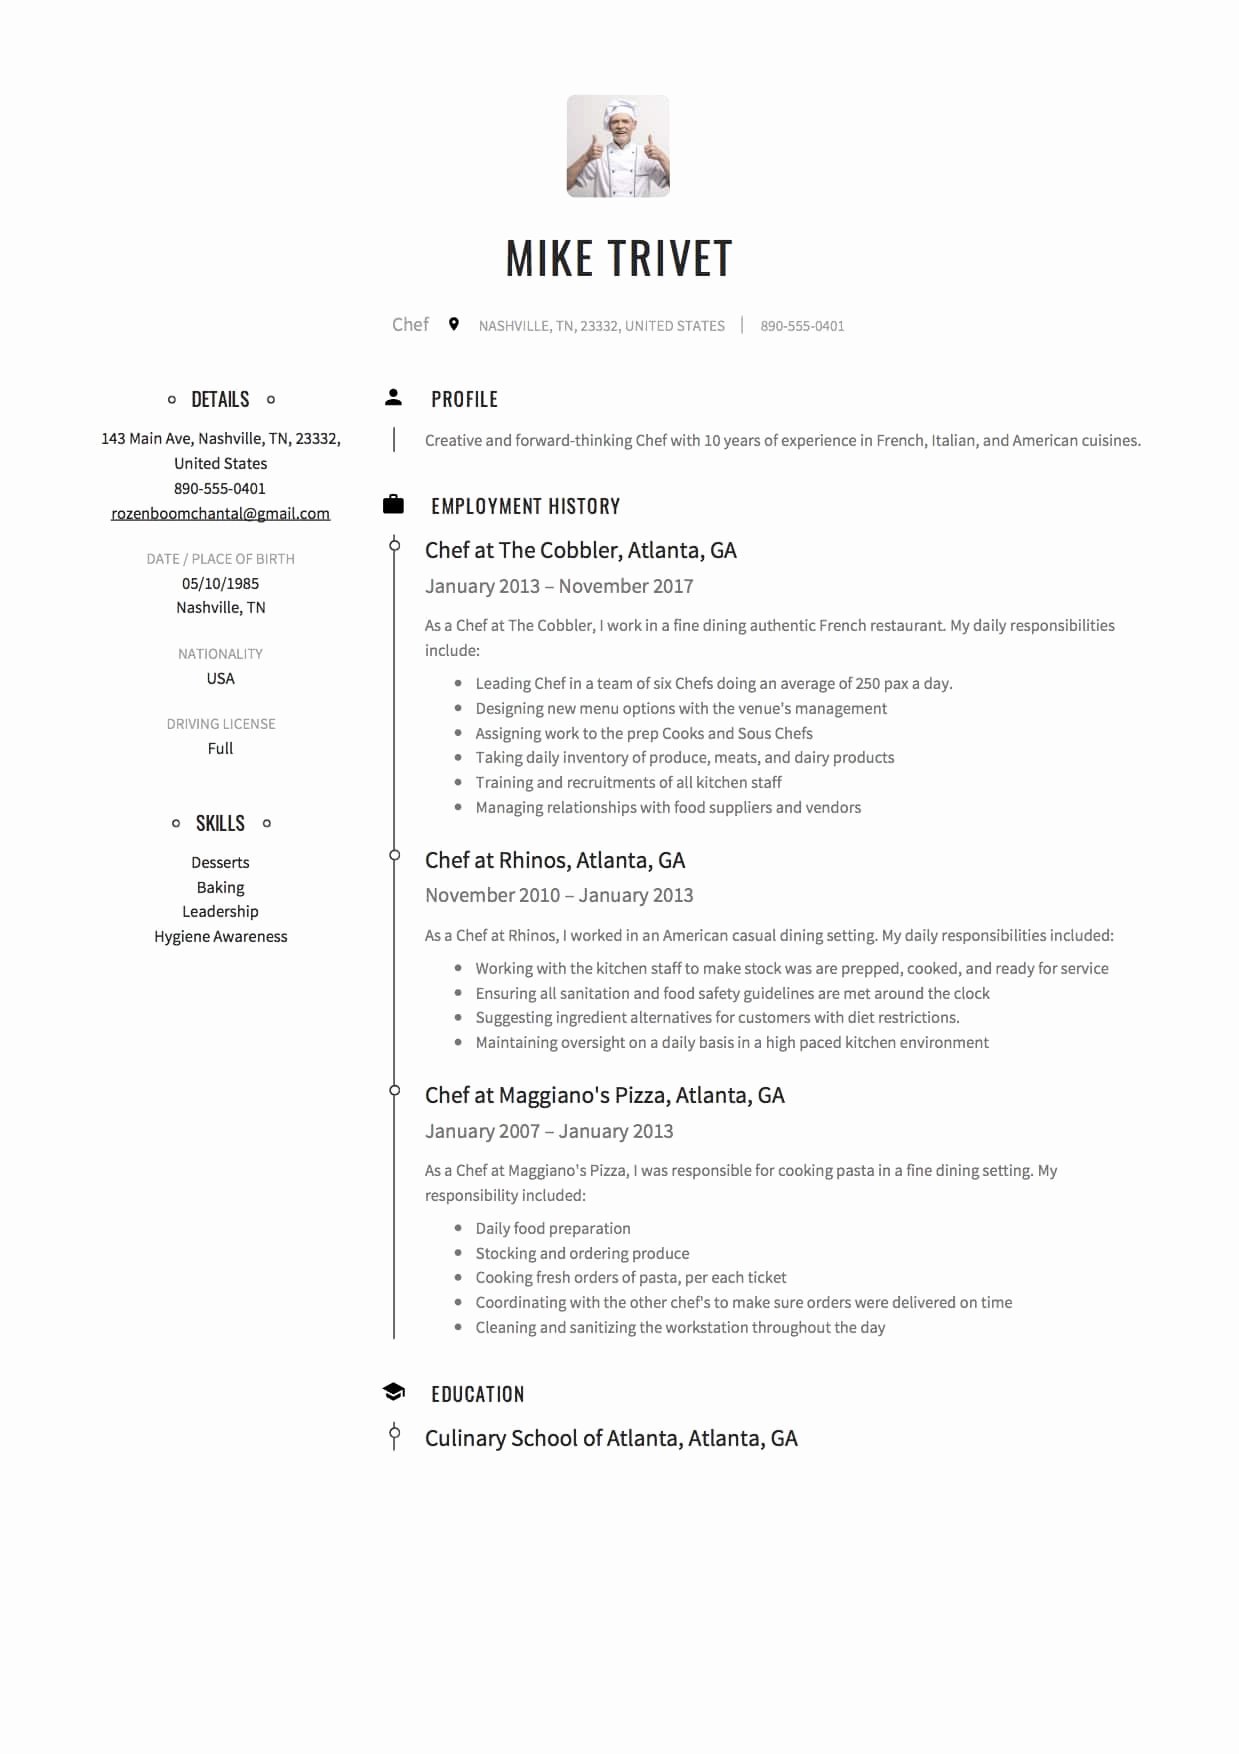 Resume for A Chef Inspirational 12 Chef Resume Sample S 12 Different Designs 2018